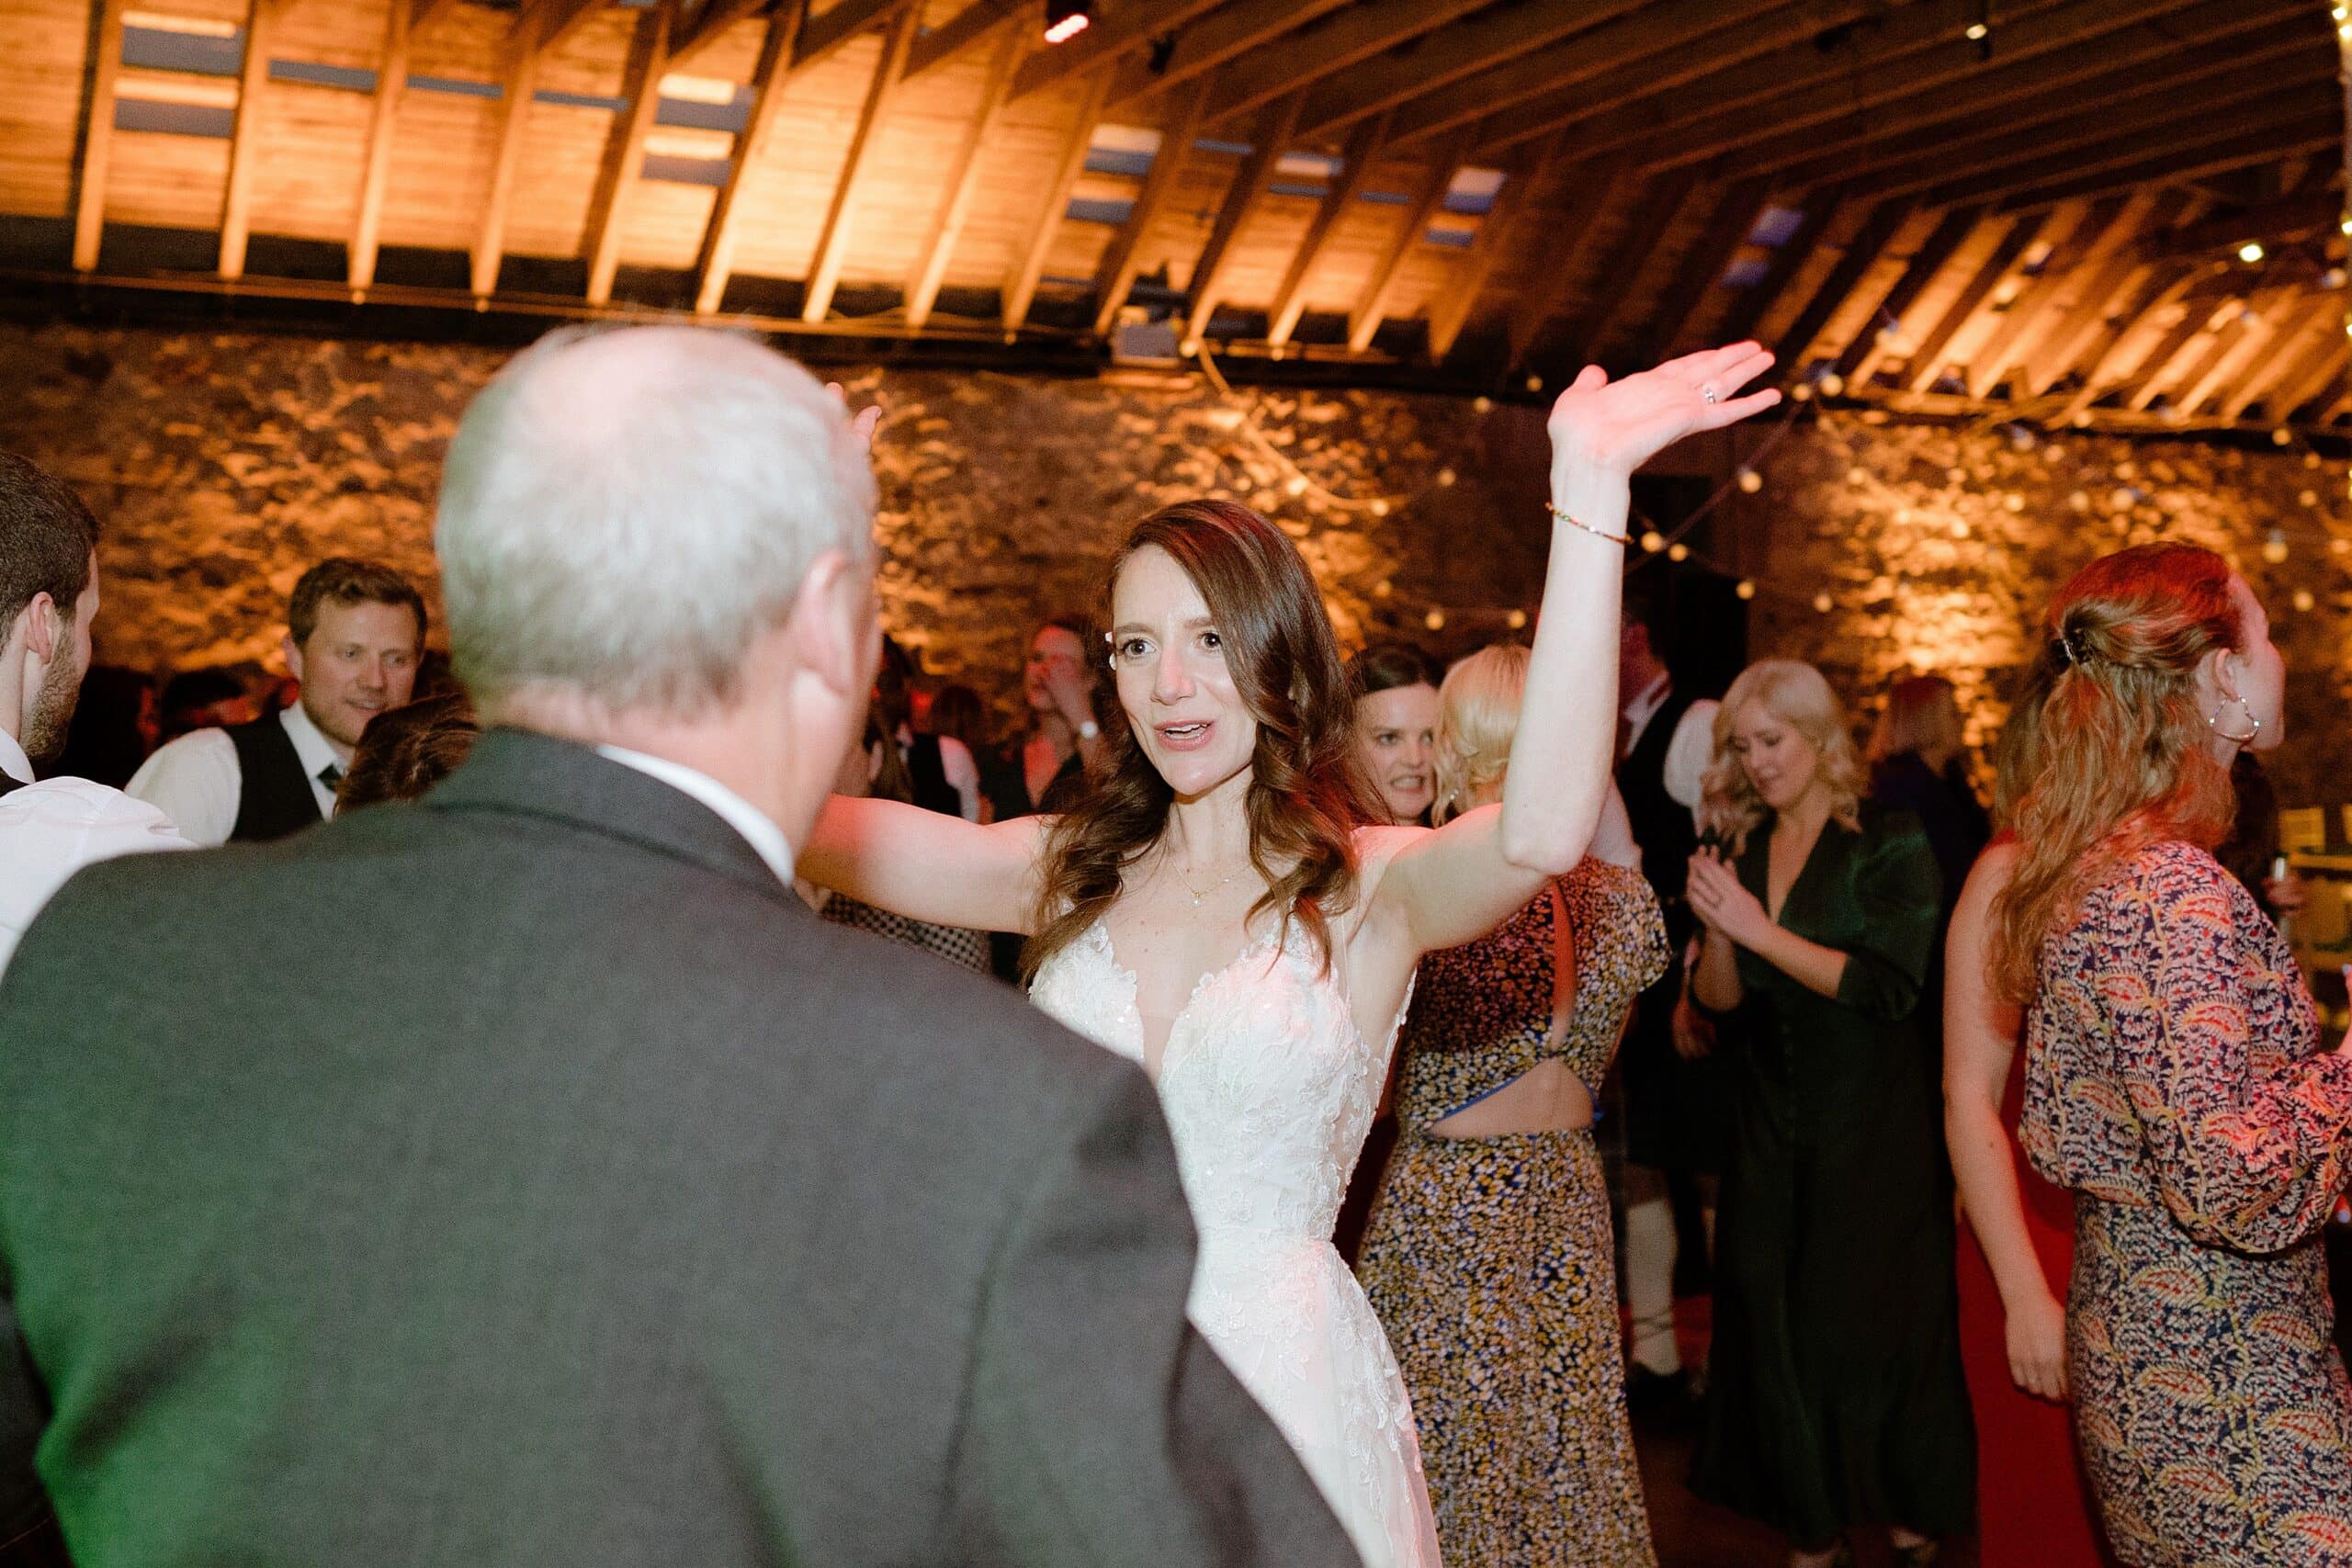 st andrews wedding photographer captures the bride dancing with a guest underneath wooden beams with festoon lights in the background at a barn wedding venue in scotland